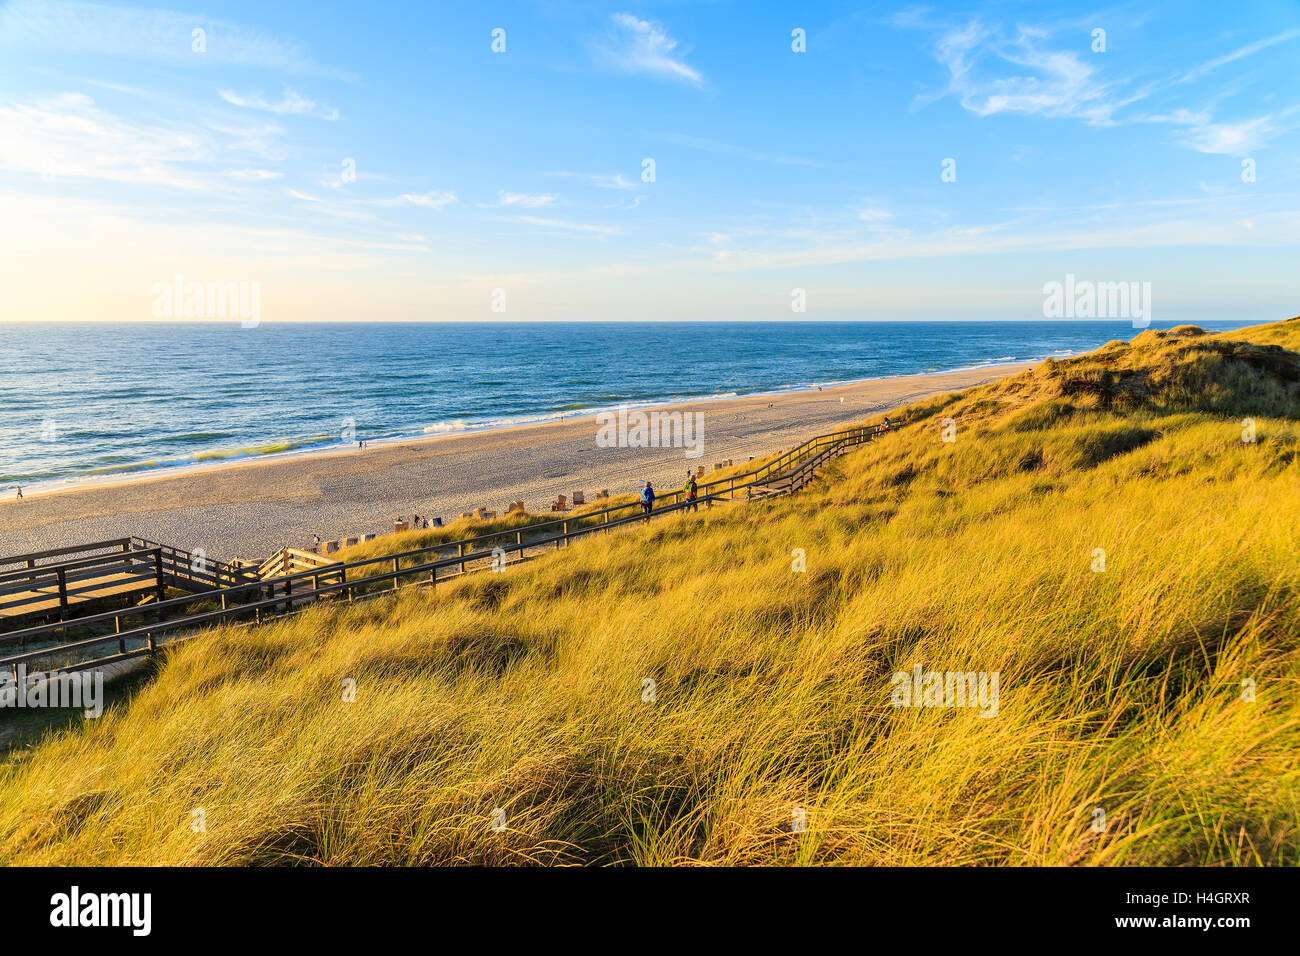 Golden grass on sand dune and view of beach at sunset time, Sylt island, Germany Stock Photo